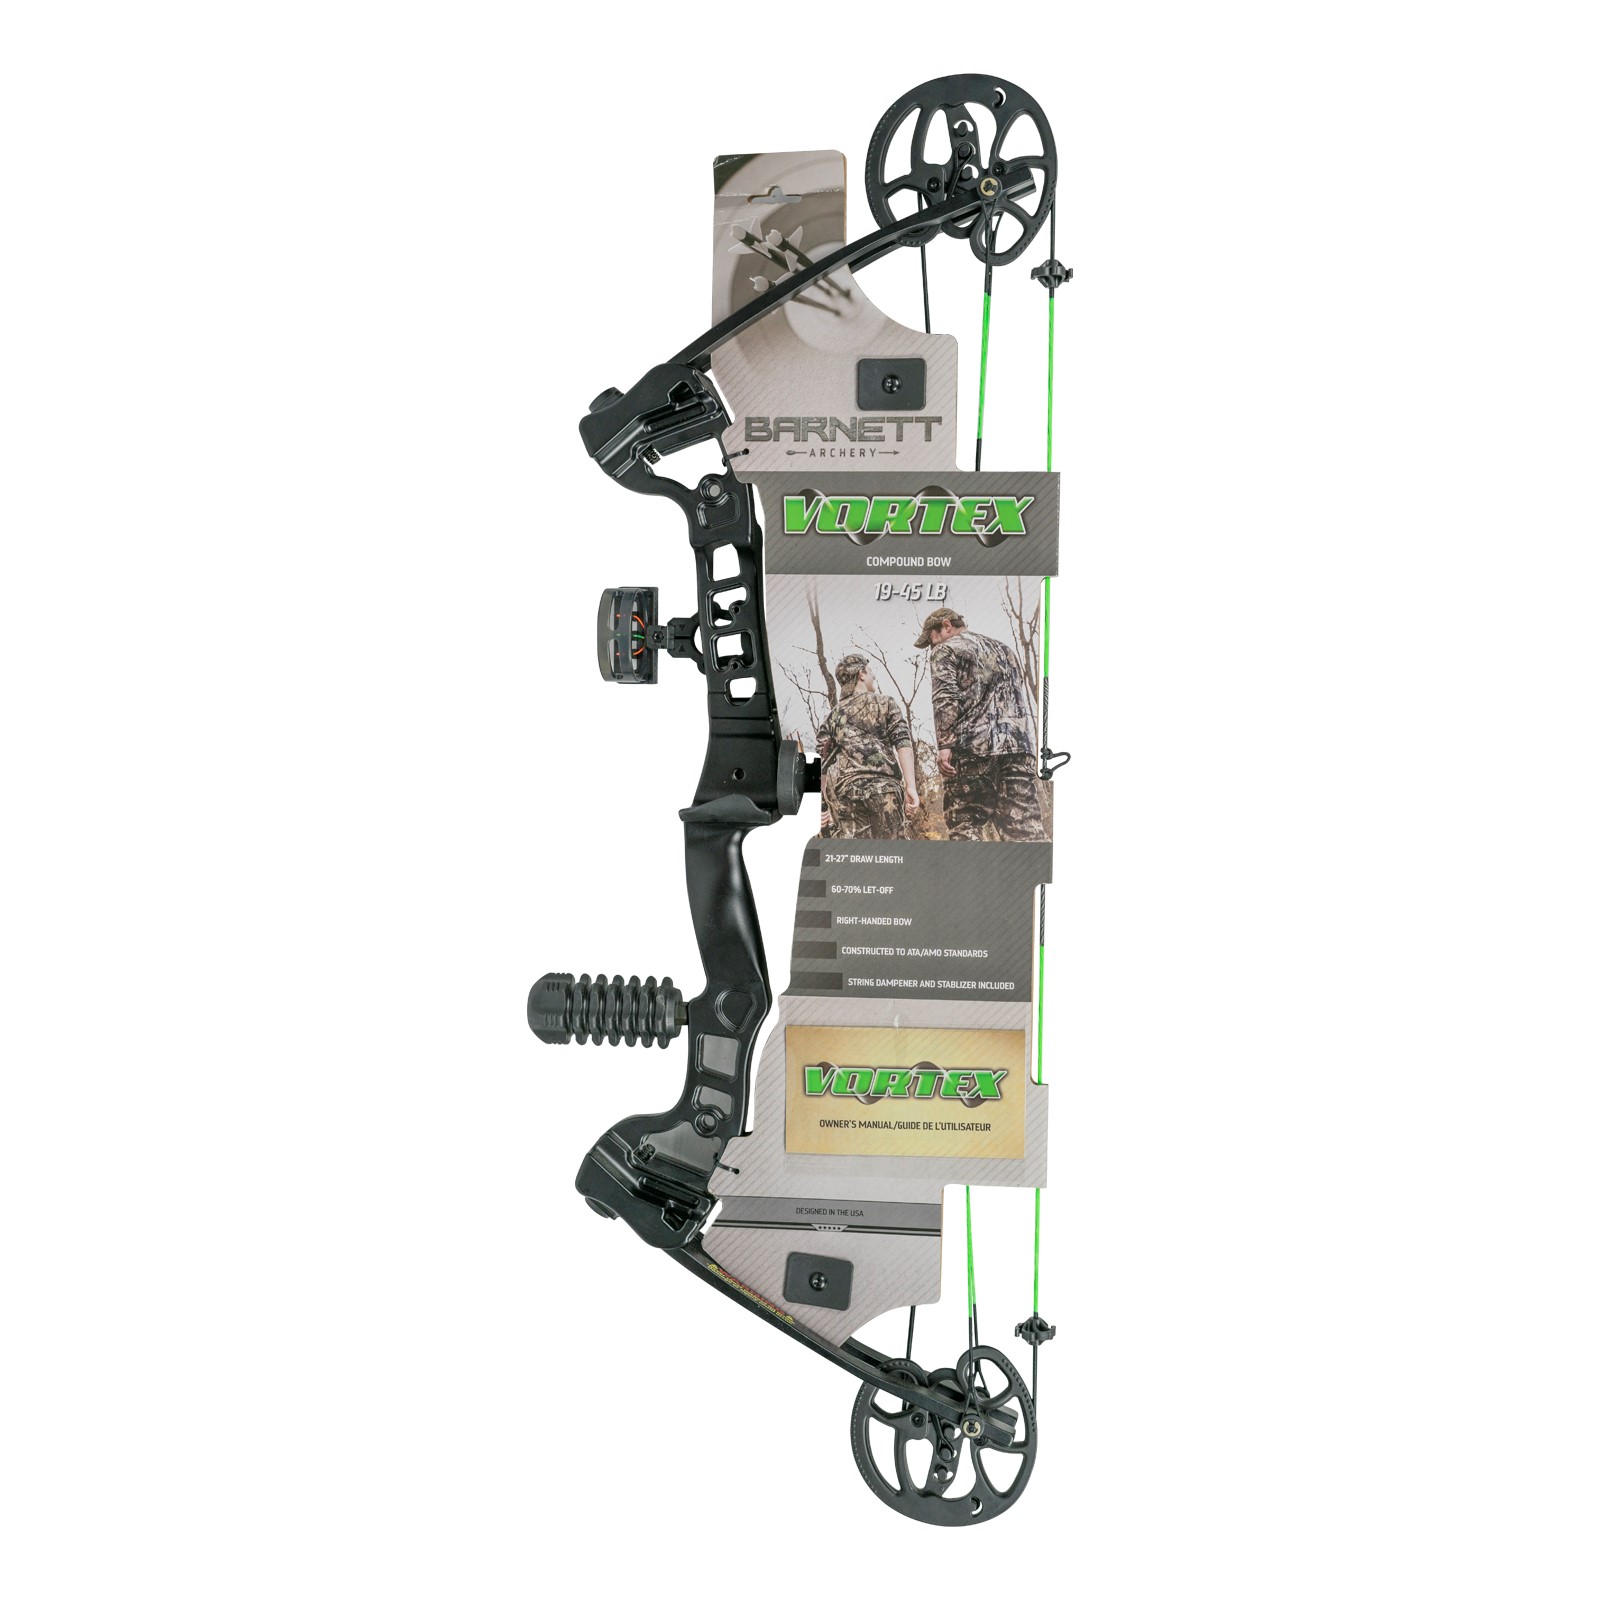 Barnett Outdoors Black Youth Vortex Compound Bow Right Handed, 19-45lb  Draw, 21-27